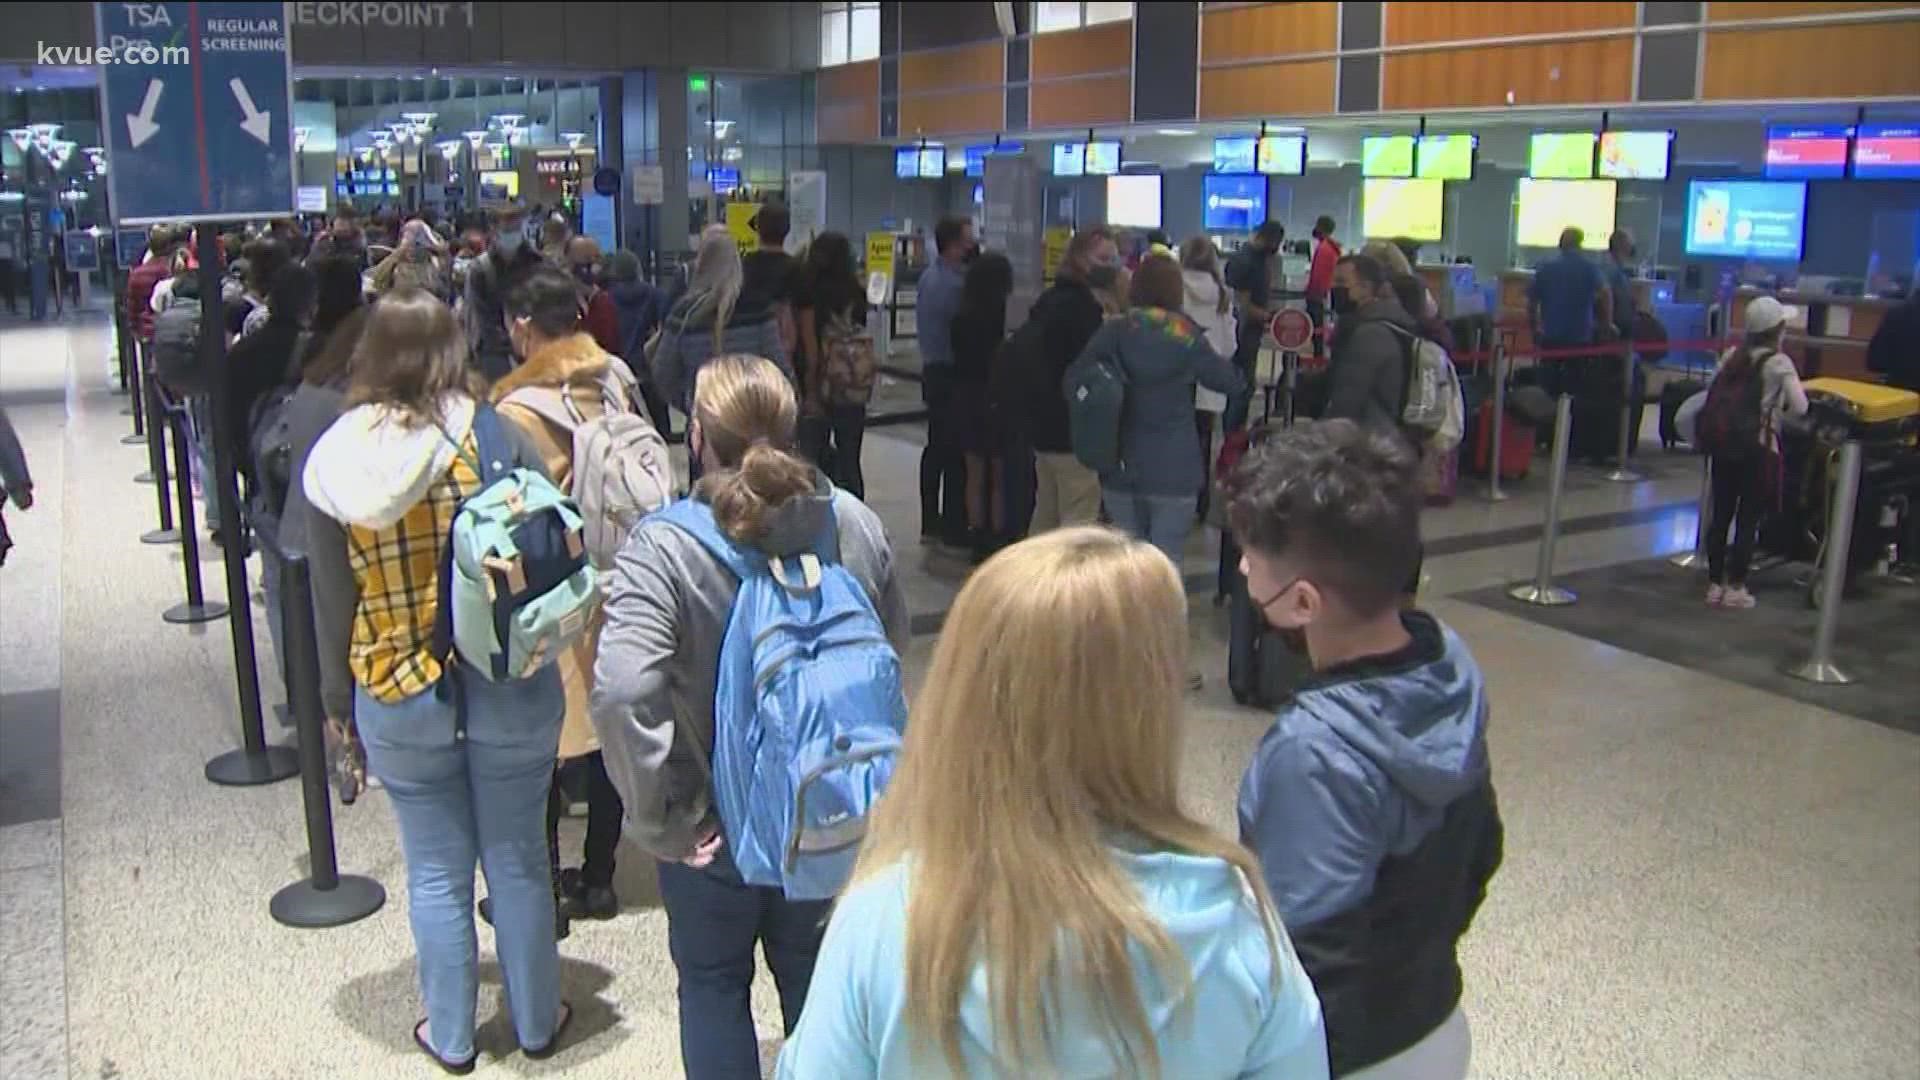 More travelers are hitting the skies and that could mean longer wait times at the airport. Here are some tips that could help you out.